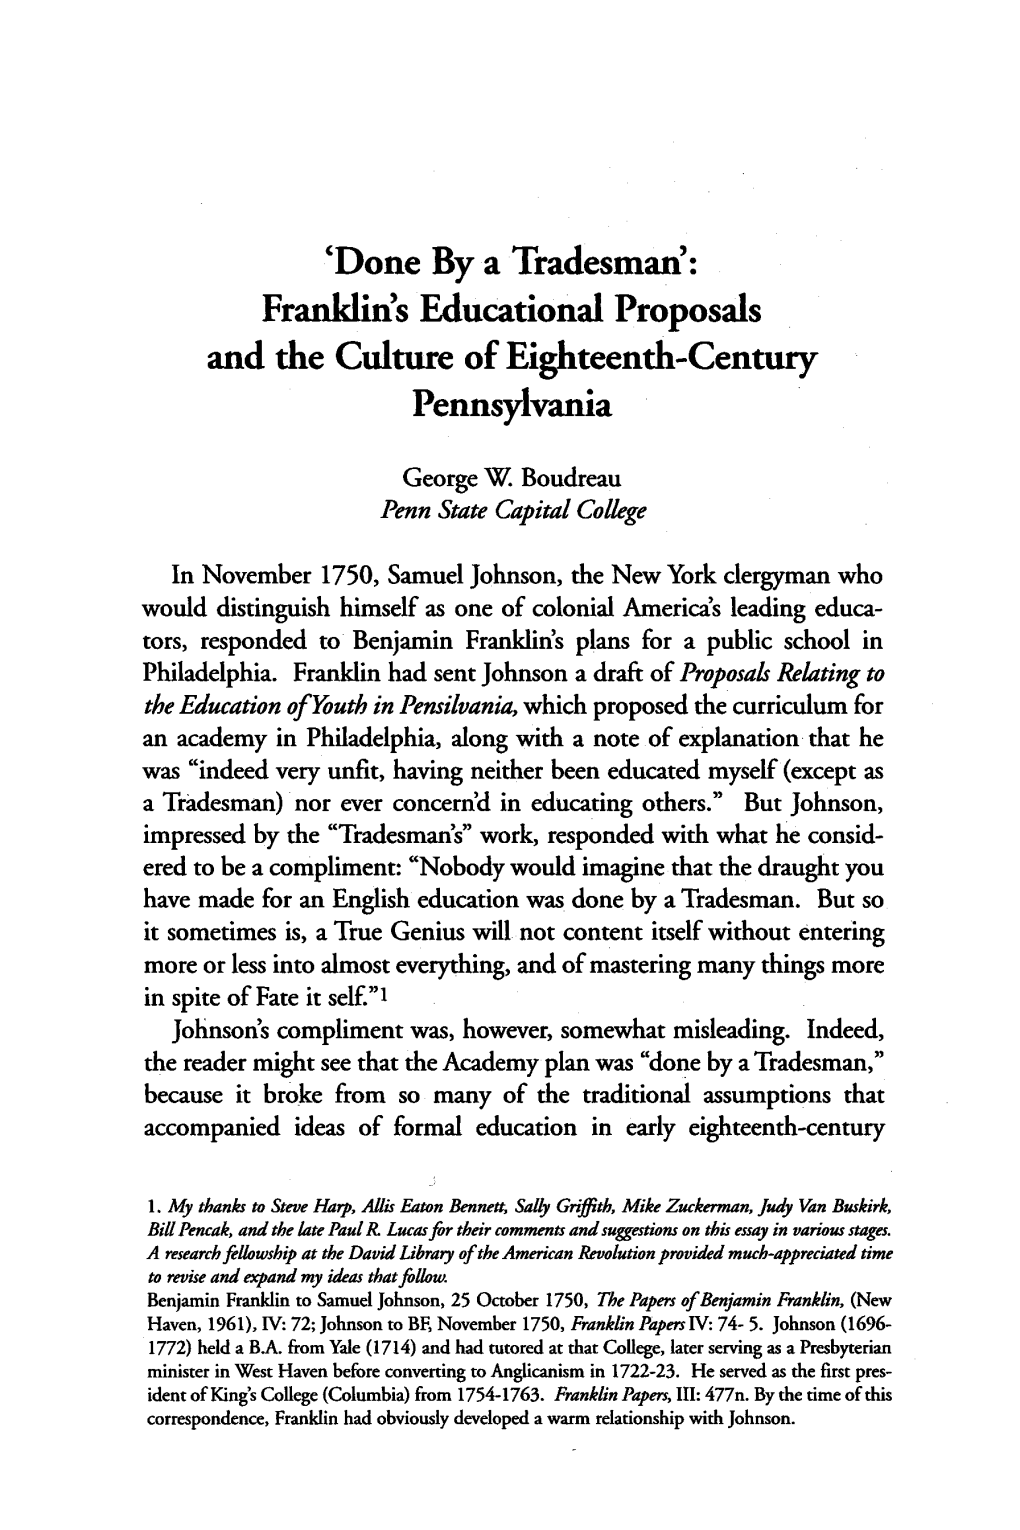 Frankdin's Educational Proposals and the Culture of Eighteenth-Century Pennsylvania